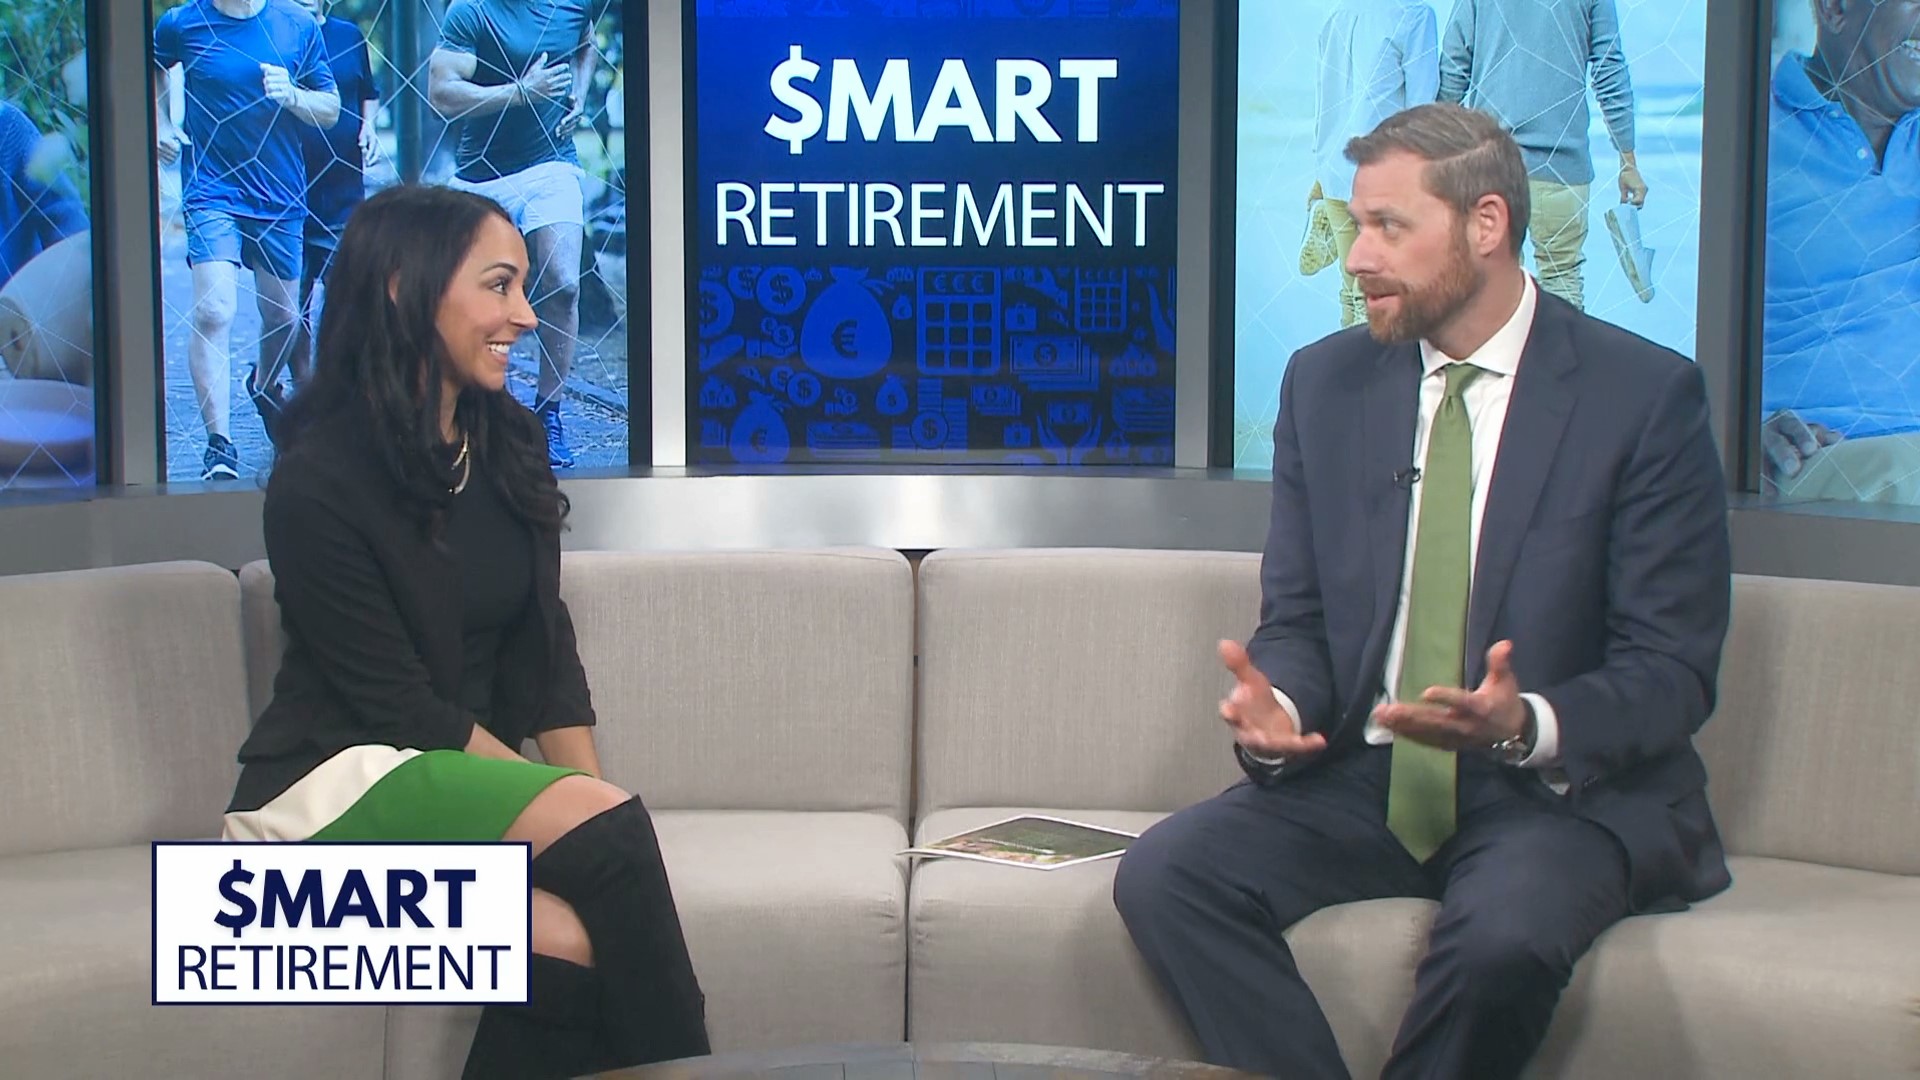 Learn what to do during a market correction on Smart Retirement sponsored by Johnson Brunetti.